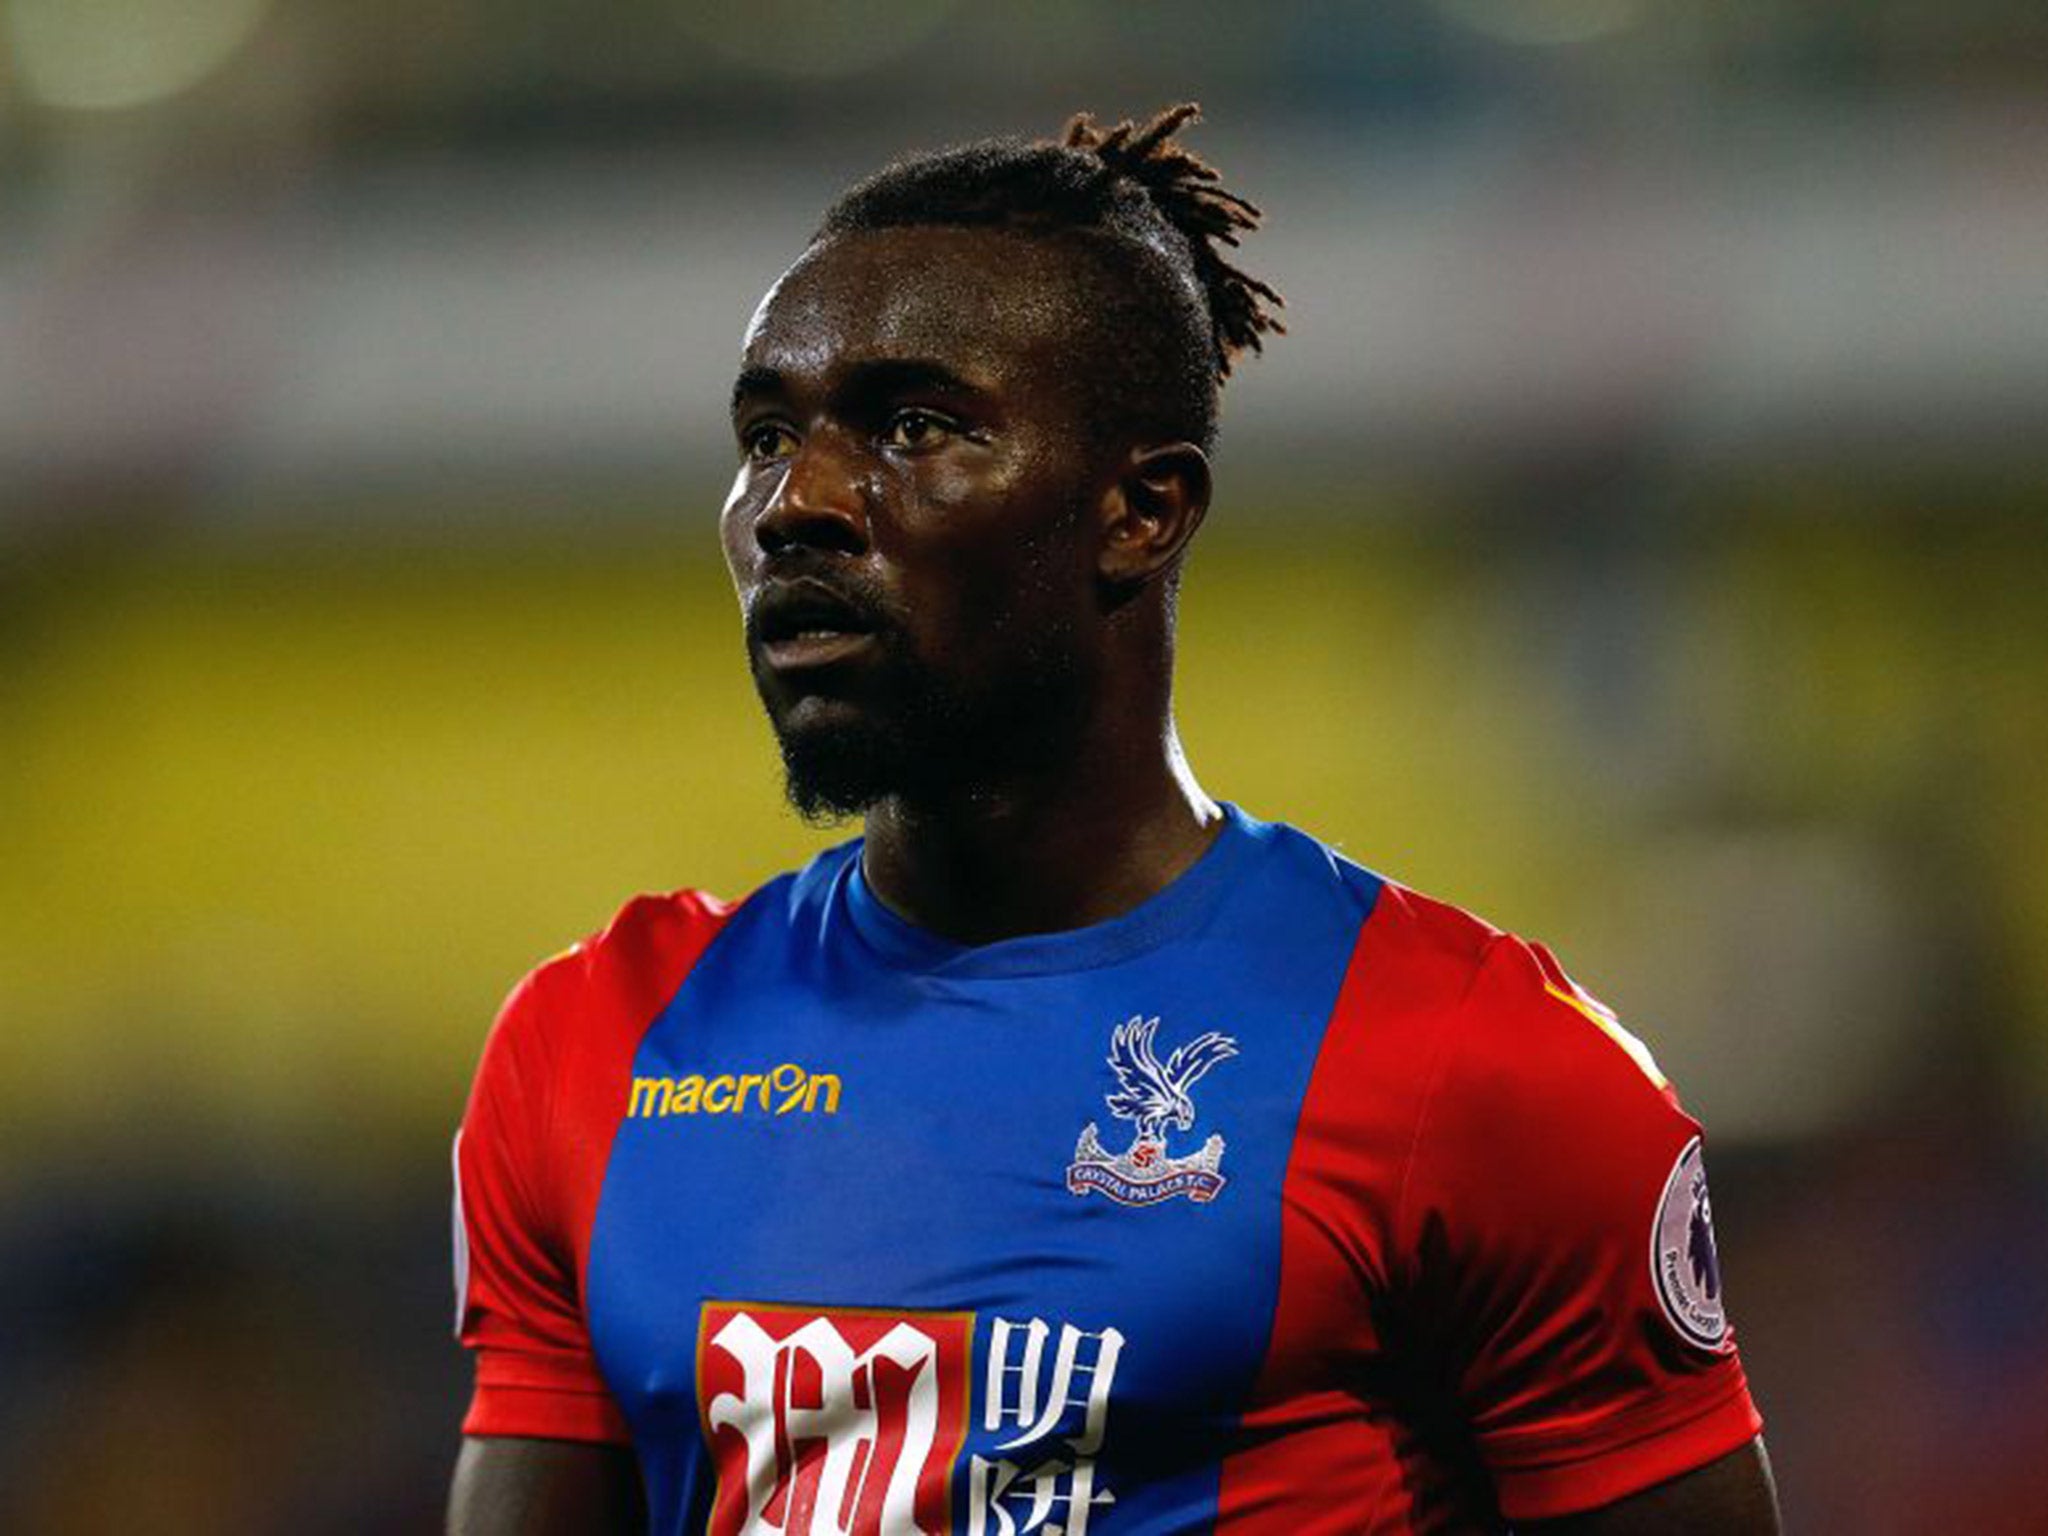 Crystal Palace defender Pape Souare suffered a broken leg in the accident